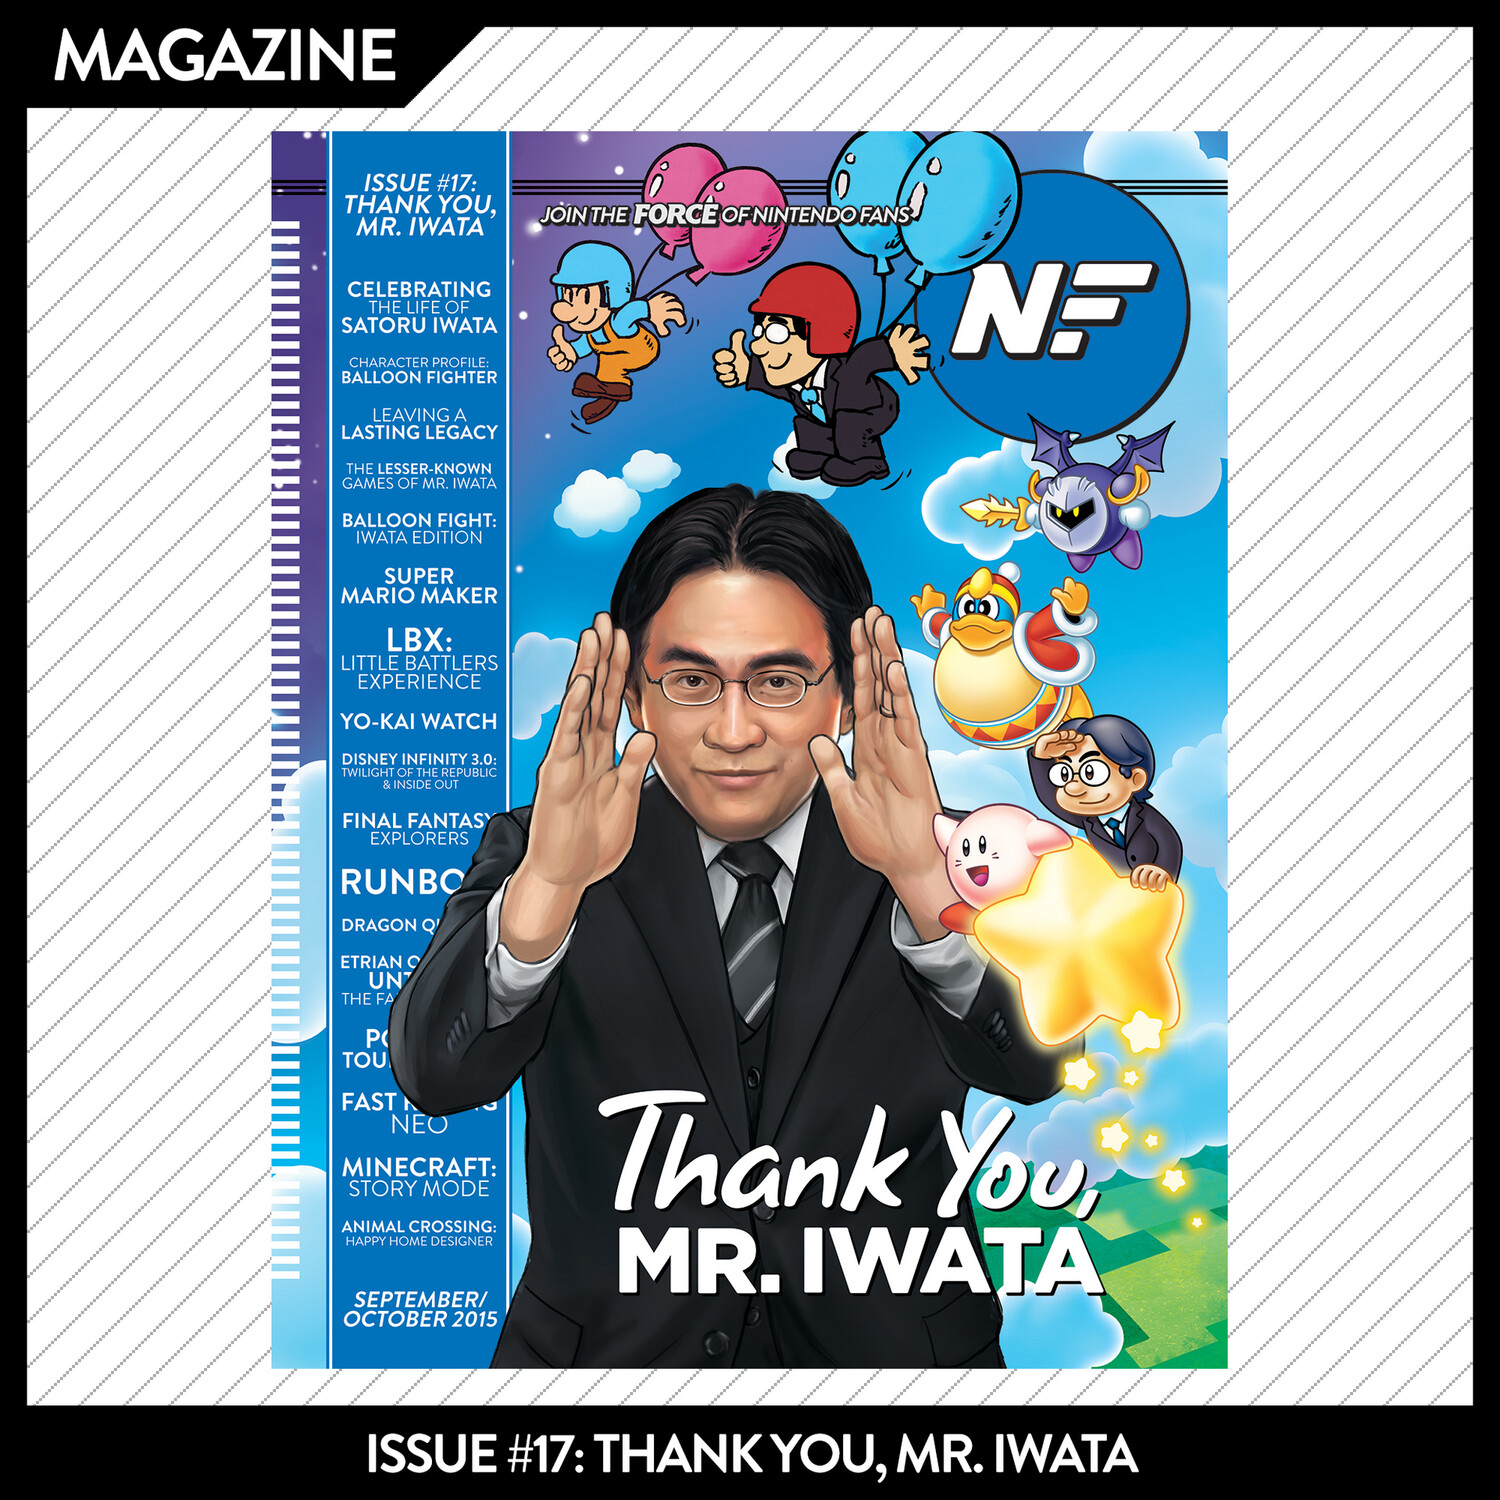 Issue #17: Thank You, Mr. Iwata – September/October 2015